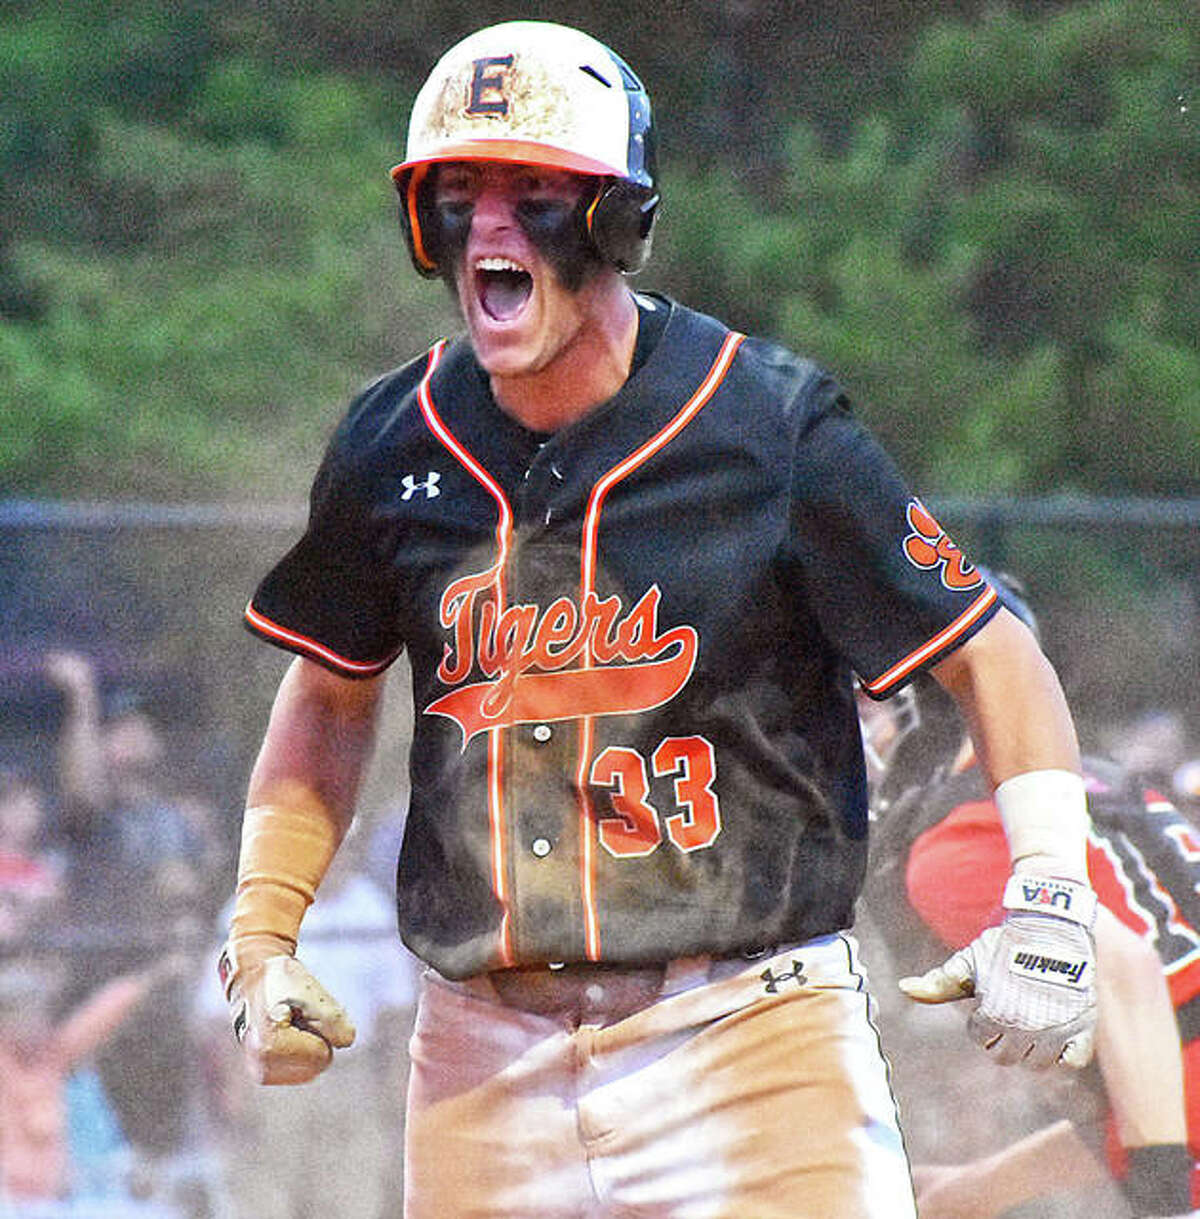 Edwardsville’s Drake Westcott reacts after scoring the go-ahead run in the Tigers’ Class 4A super-sectional victory over Chicago Marist on June 3 in Springfield.